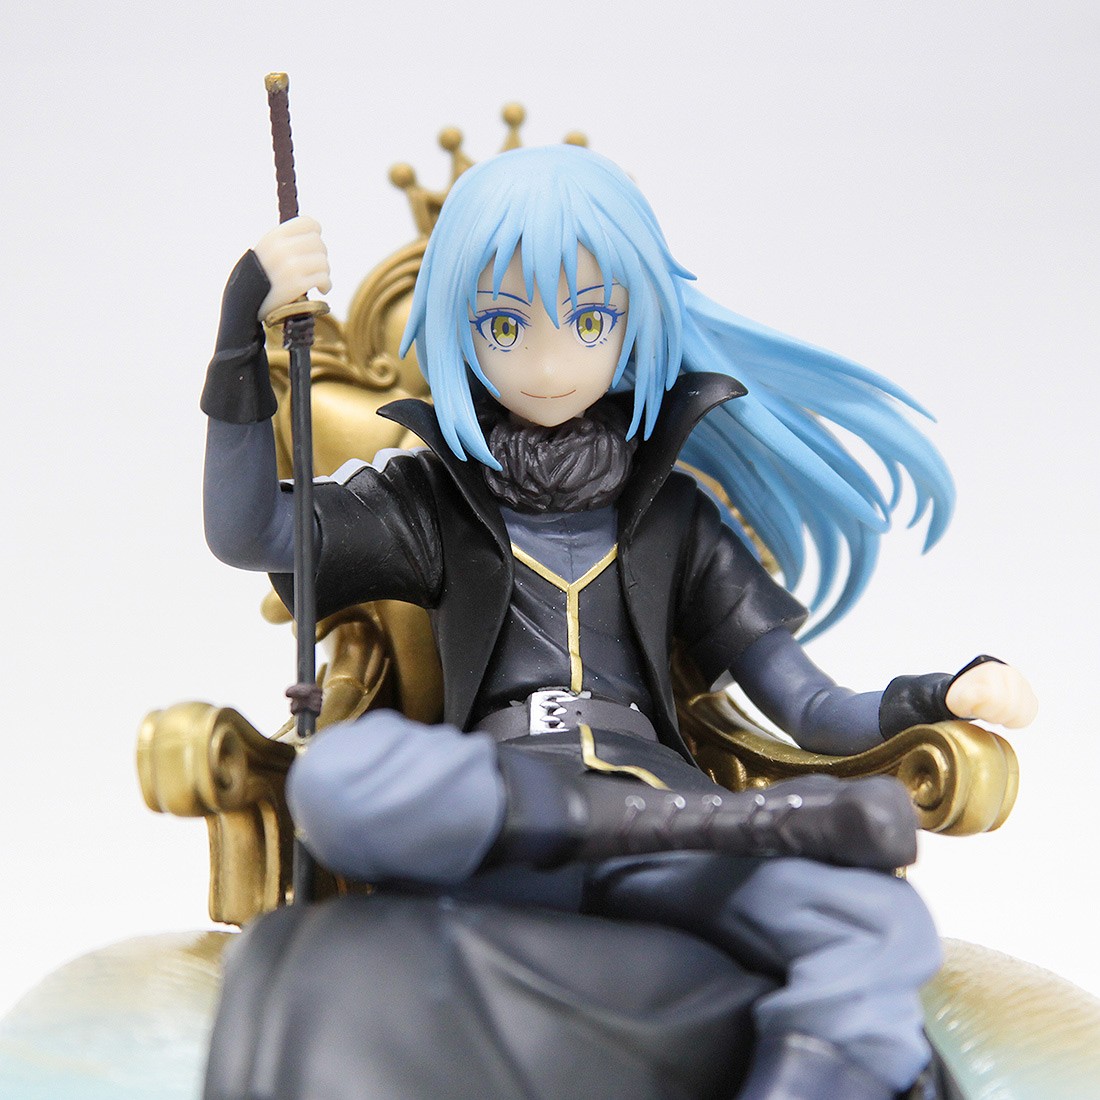 AhQ ornaments] Anime Slime Different World Anime Figures Bronze